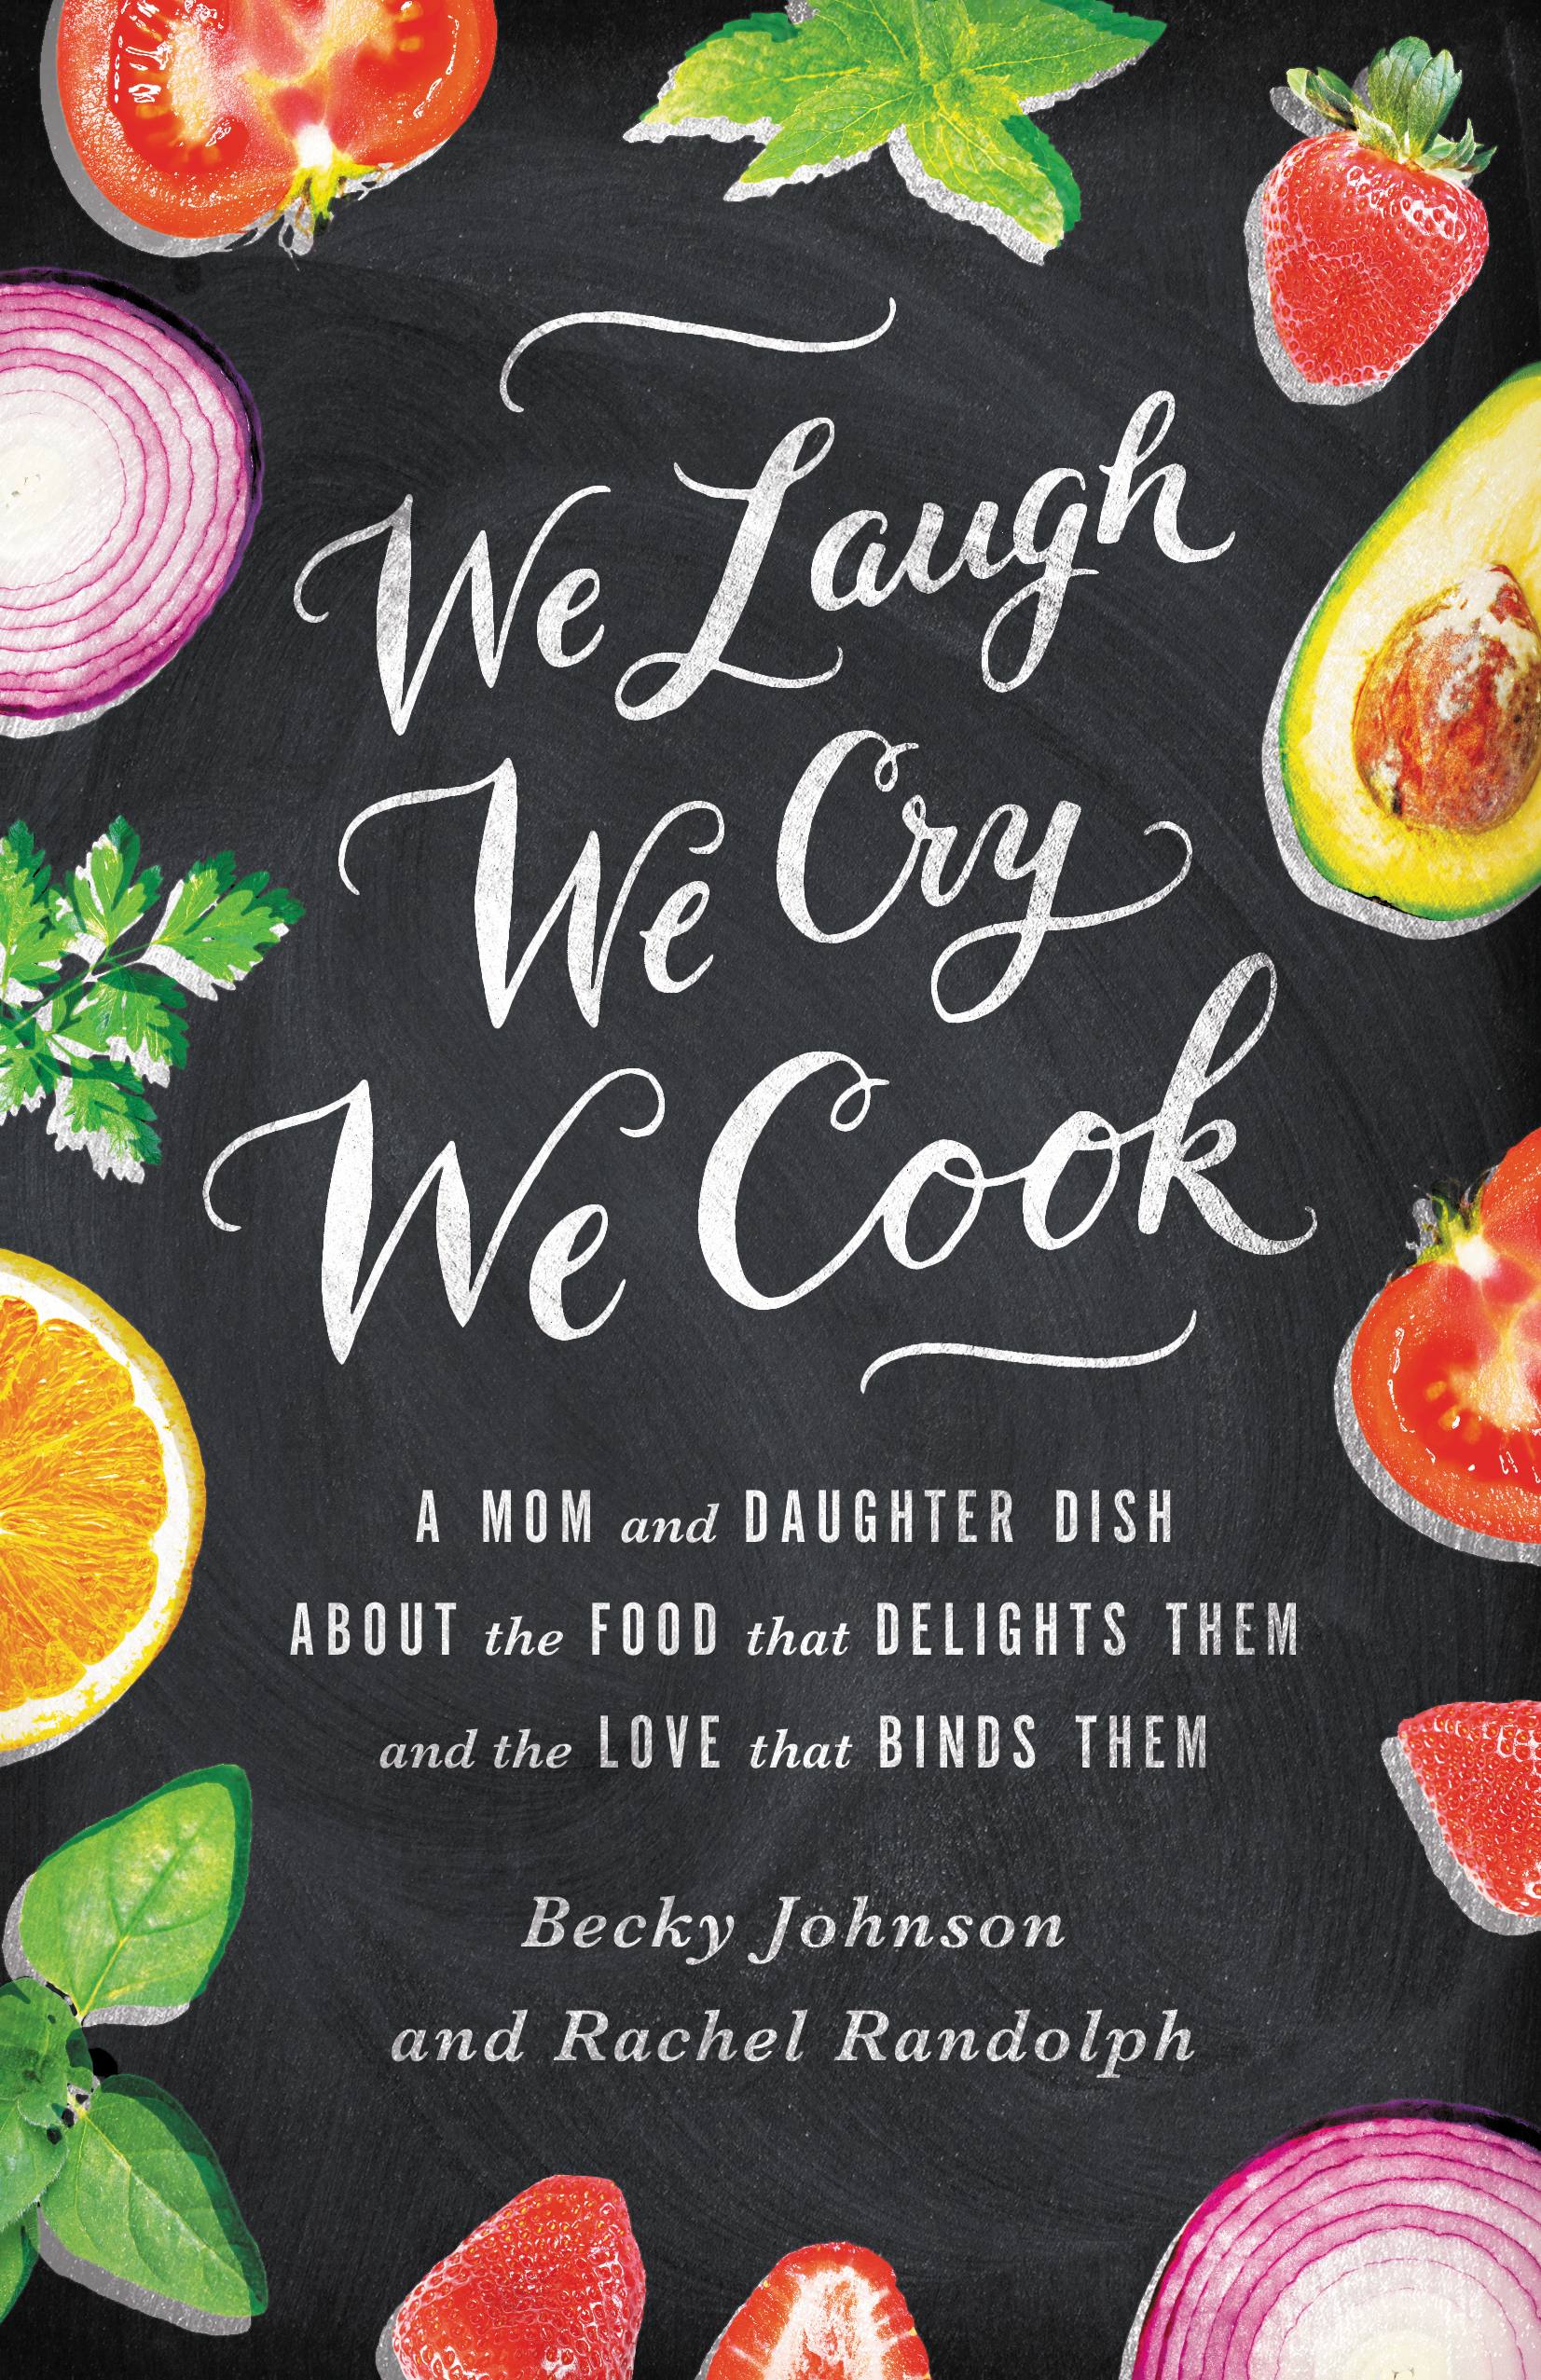 "We Laugh We Cry We Cook"